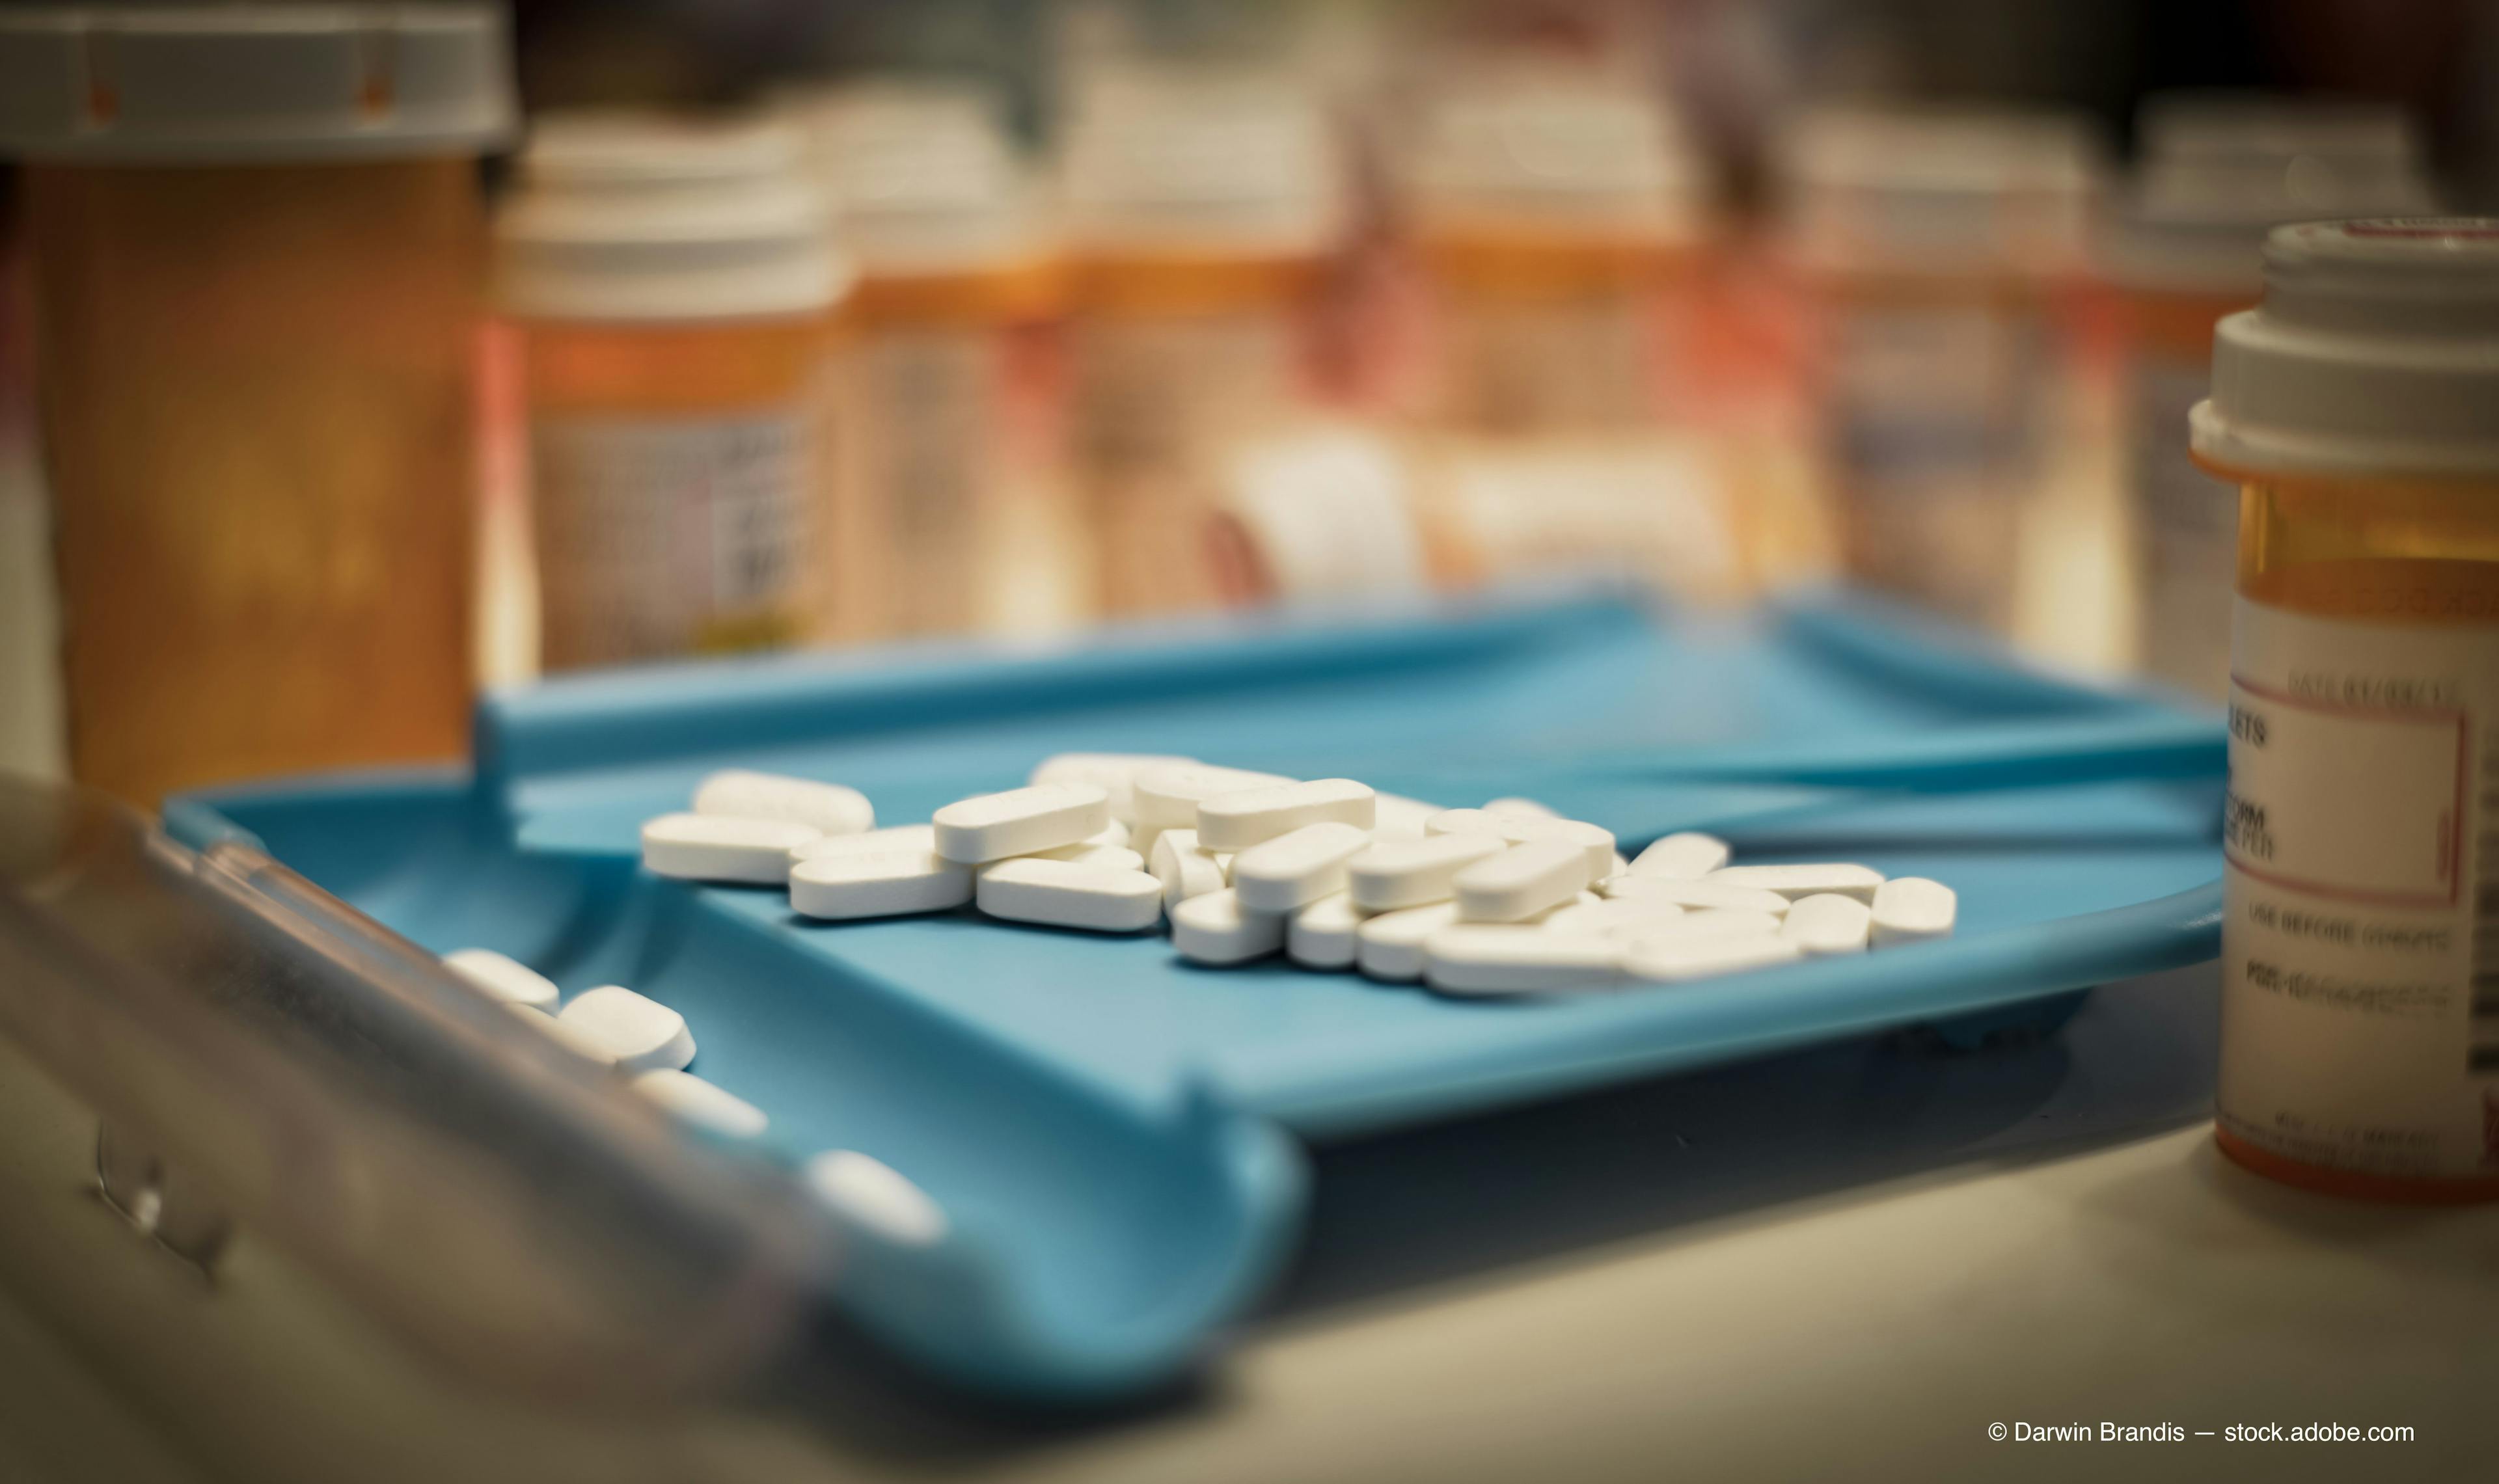 Teens, older adults not getting medications to treat opioid abuse